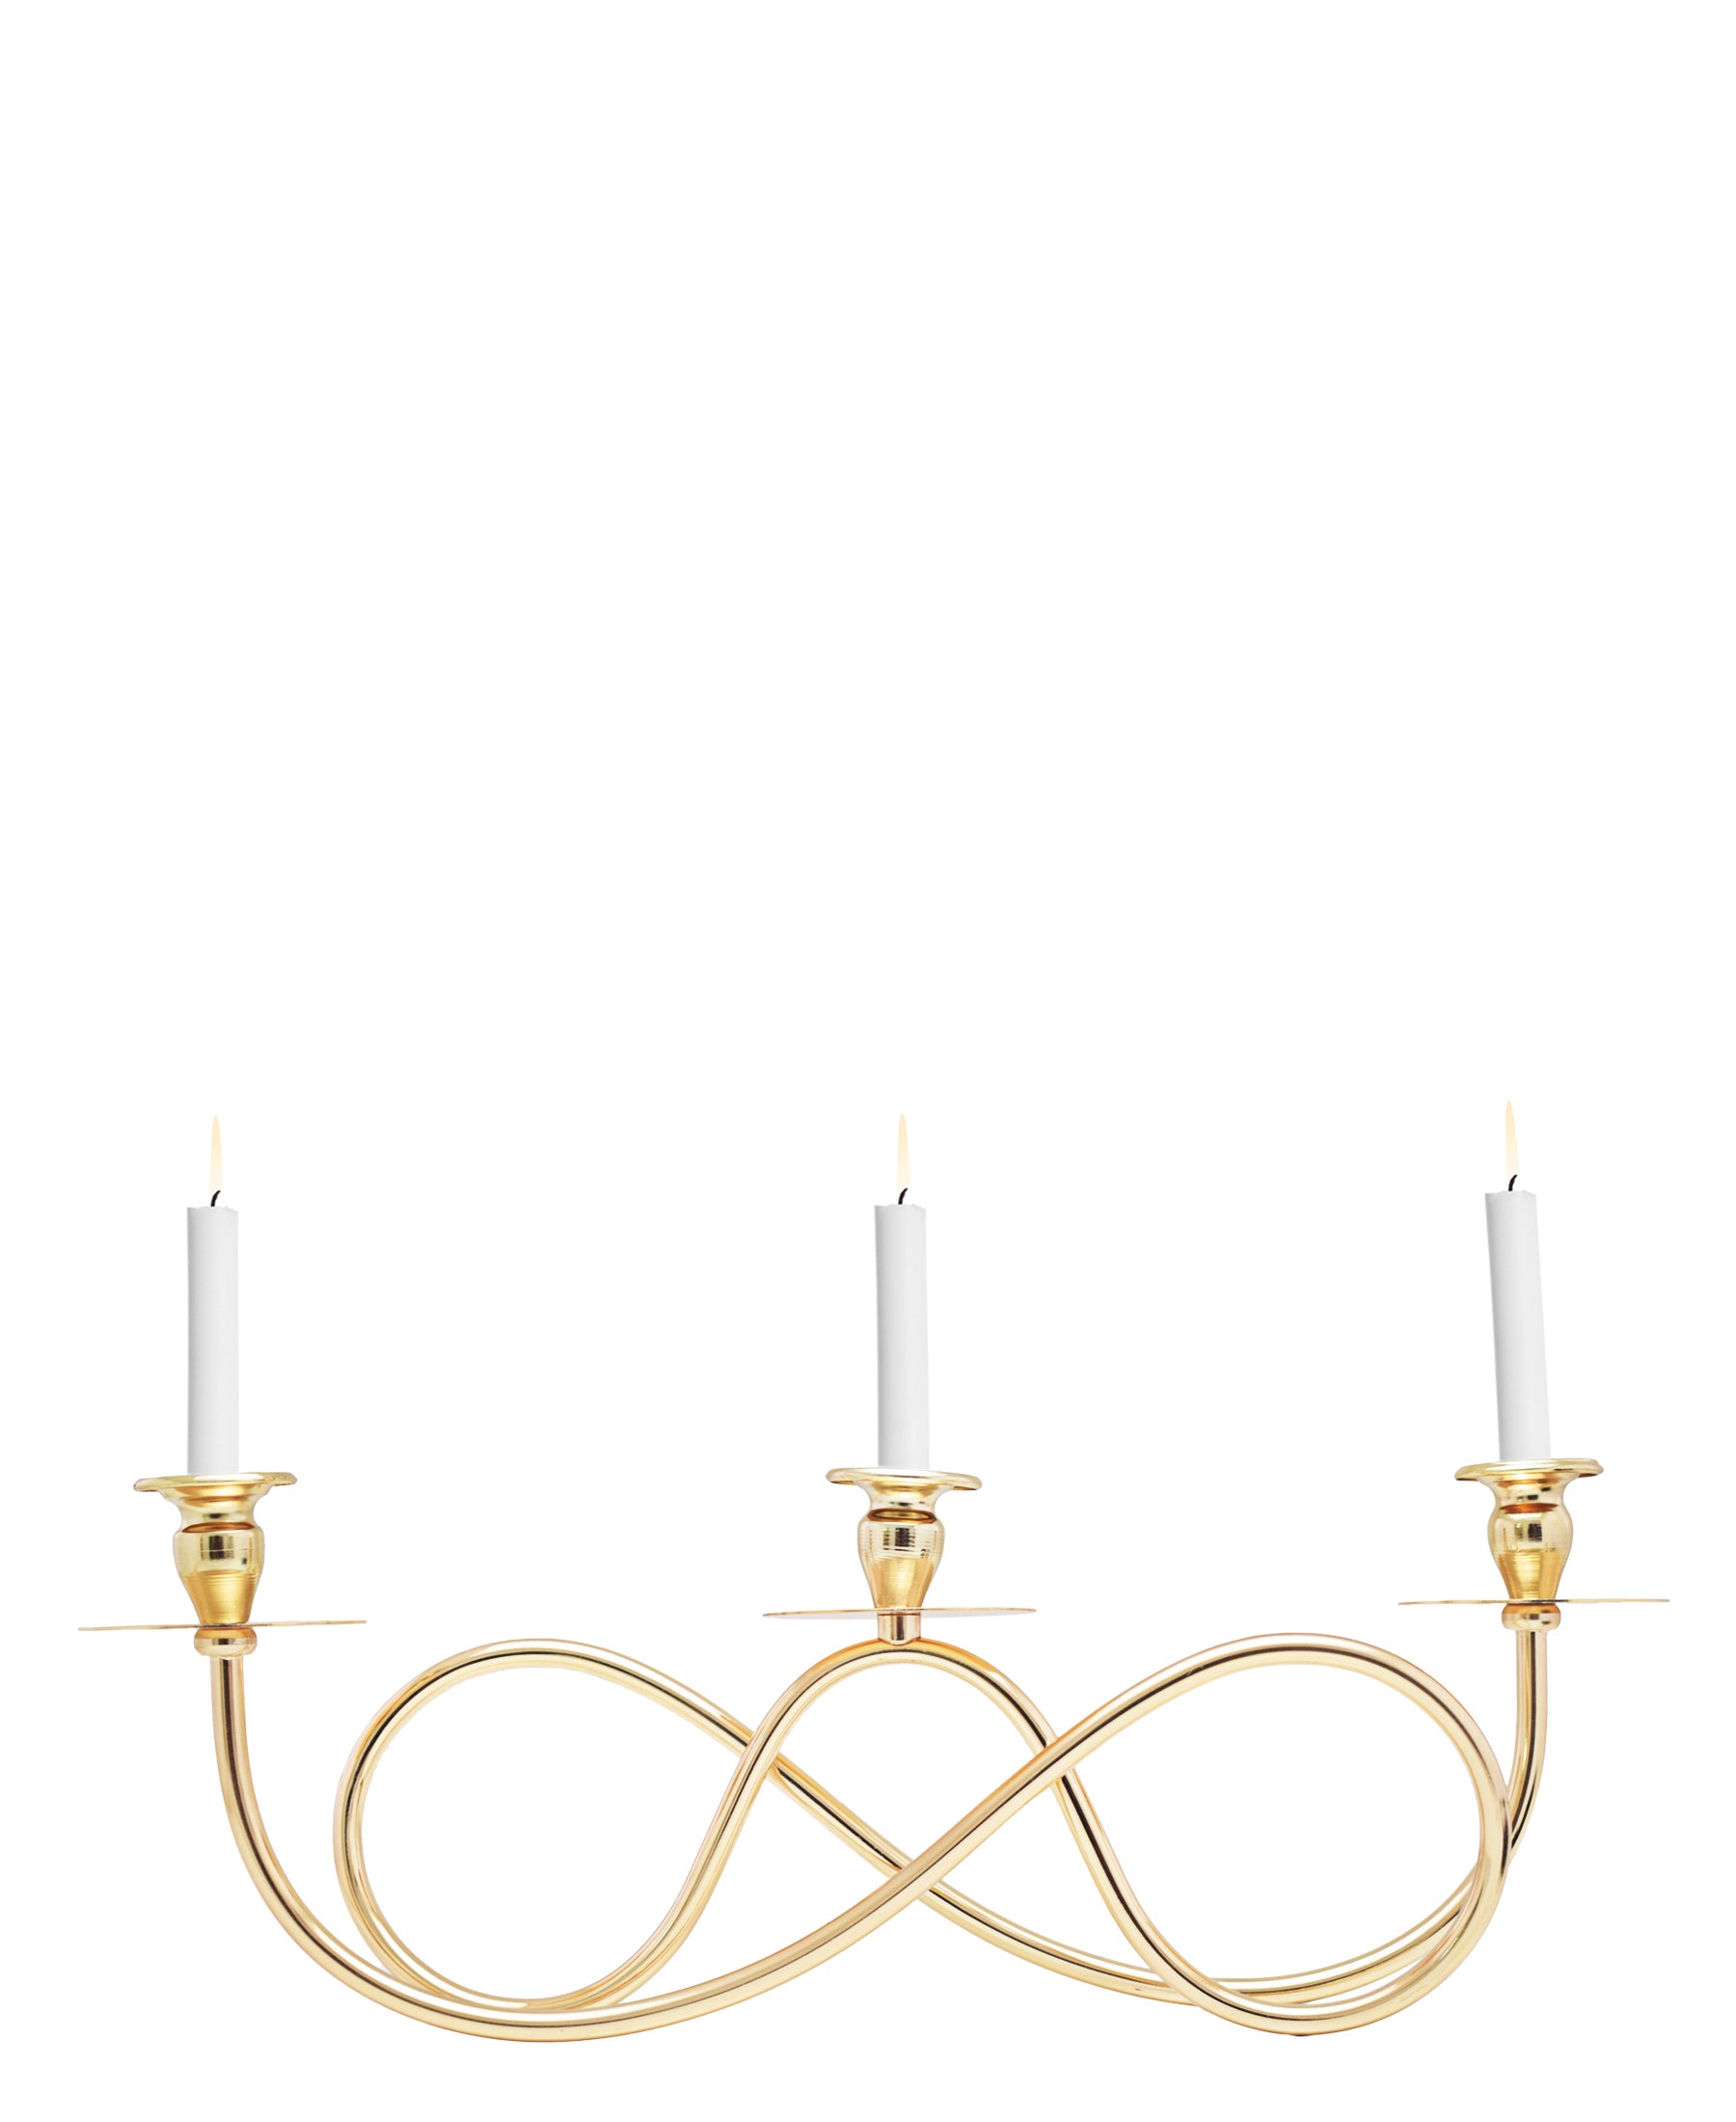 Infinity 3 Arm Candle Holder - Gold